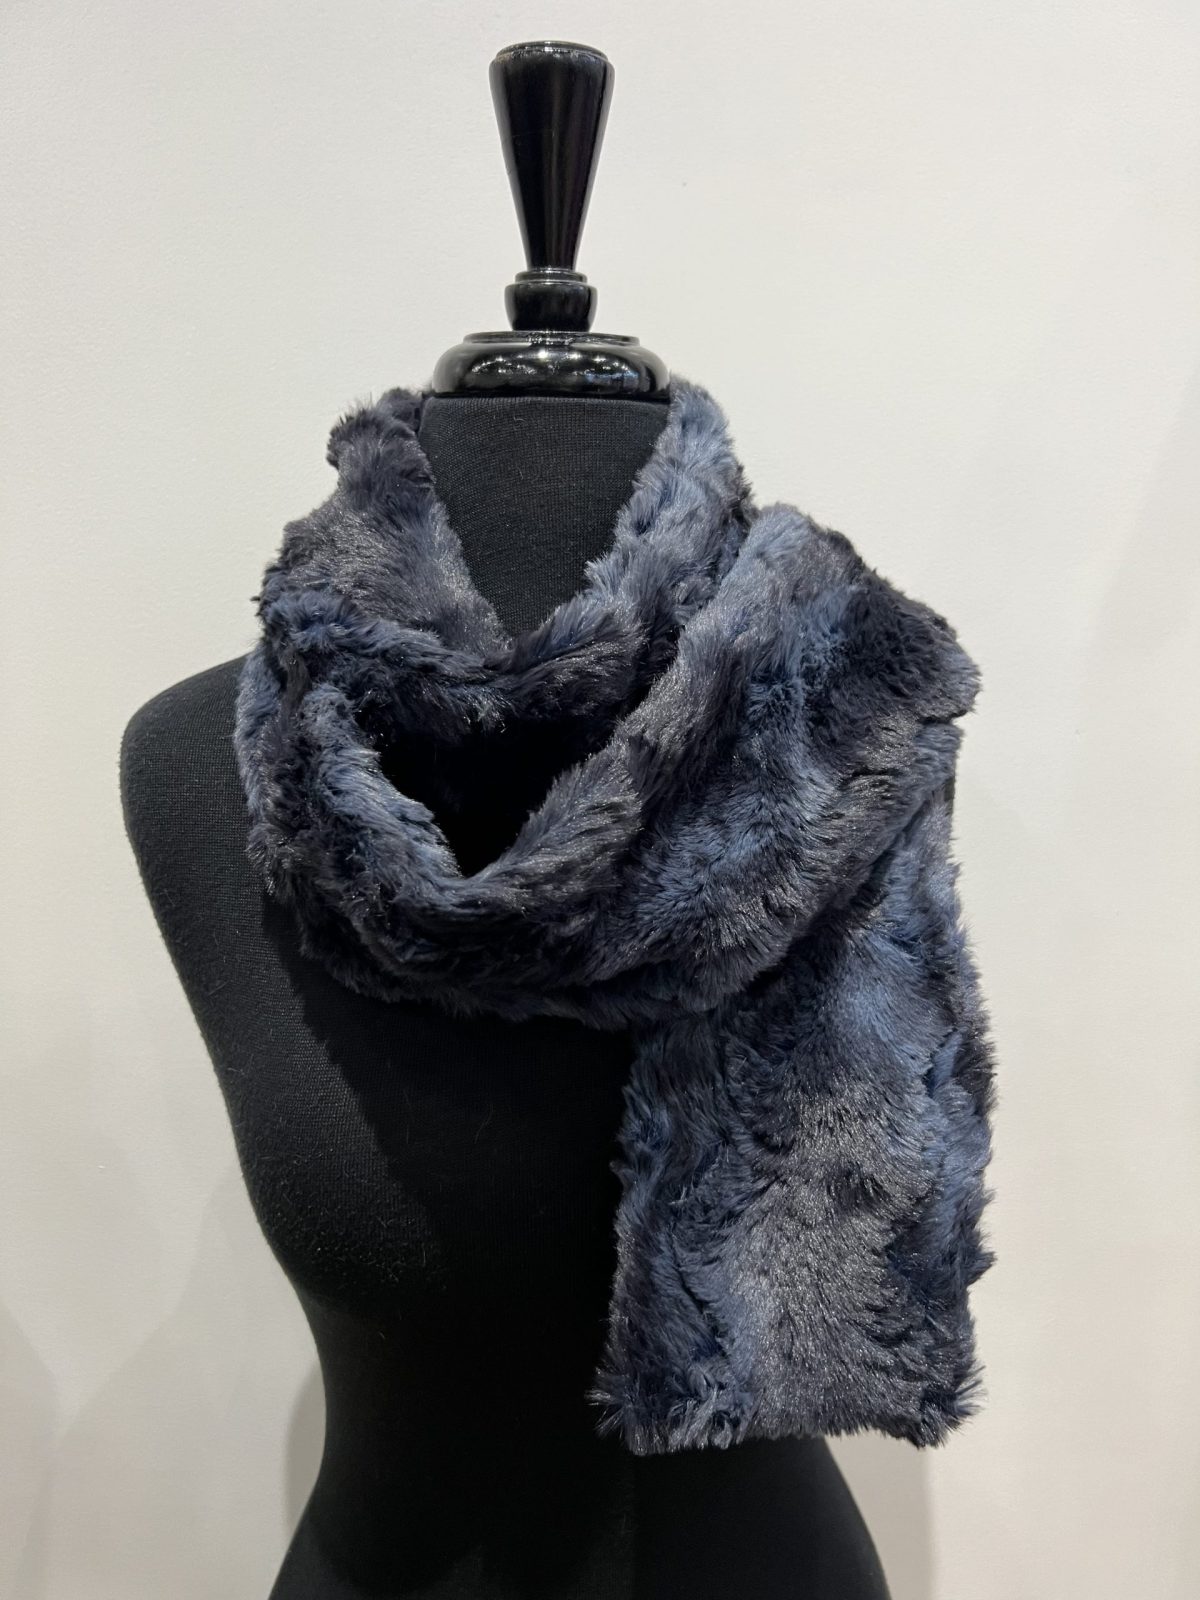 Vine Street 107 Navy Faux Fur Scarf | Ooh Ooh Shoes women's clothing and shoe boutique located in Naples and Mashpee